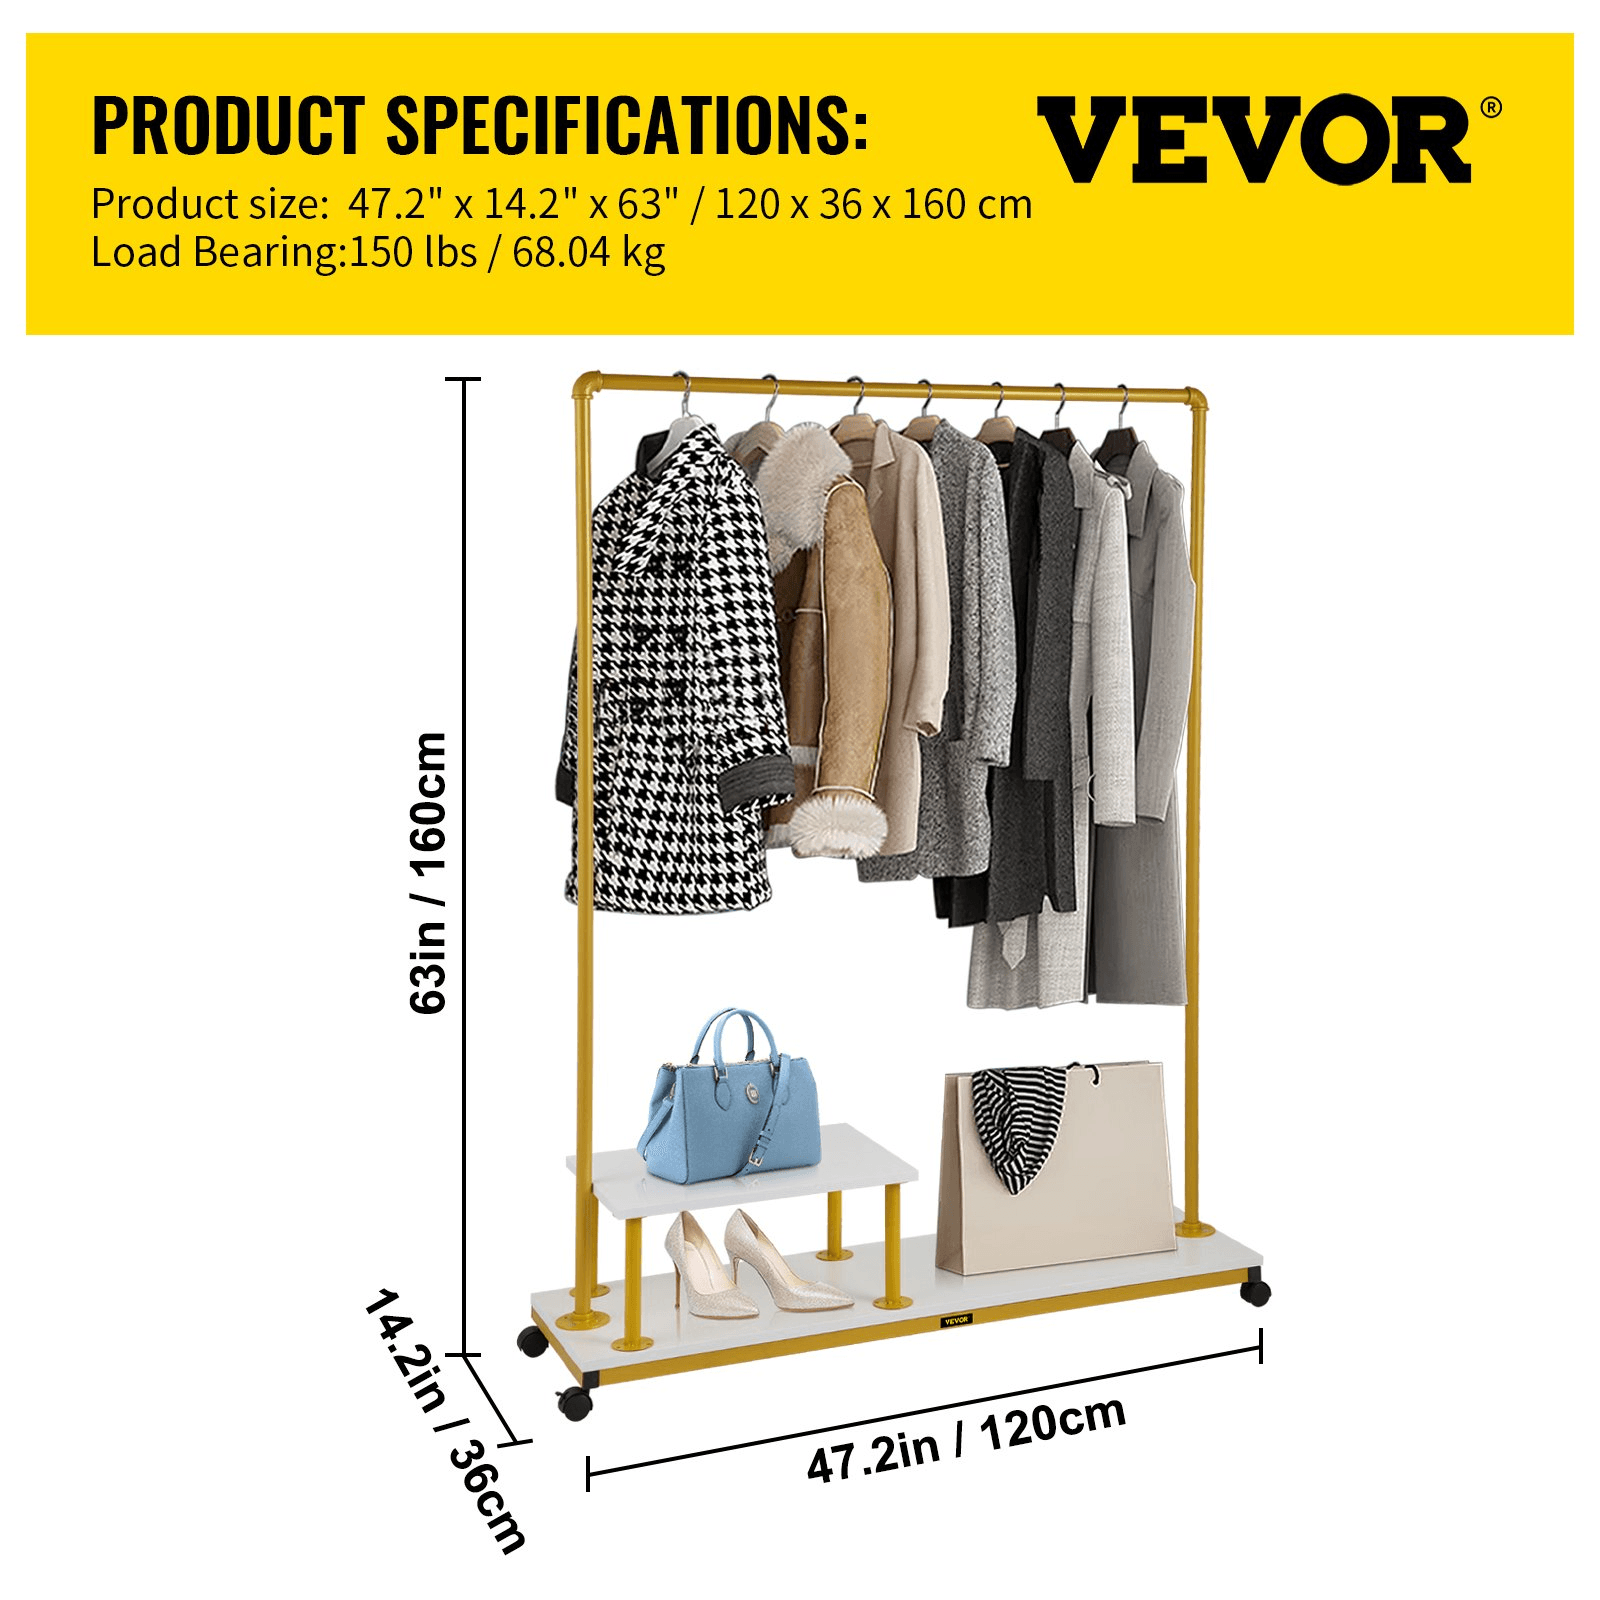 VEVOR Clothing Garment Rack, 47.2"x14.2"x63.0", Heavy-Duty Clothes Rack w/Bottom Shelf & Side Shelf, 4 Swivel Casters, Sturdy Steel Frame, Rolling Clothes Organizer for Retail Store Boutique, Gold - Loomini